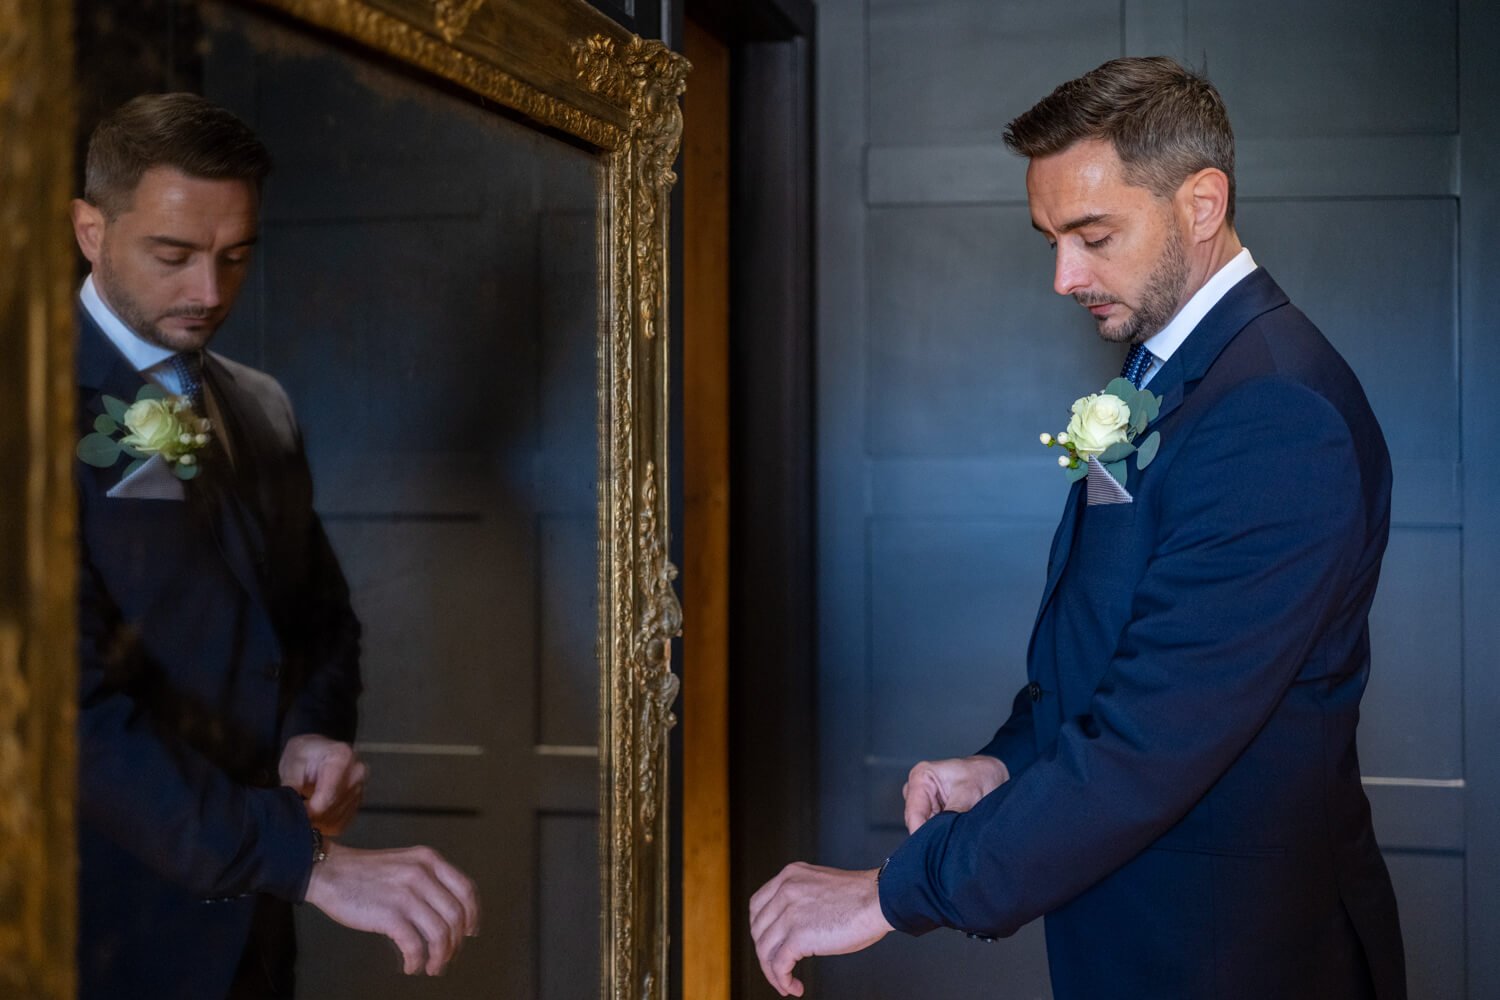 groom rearranges his cuff as he stands in front of the mirror before the wedding